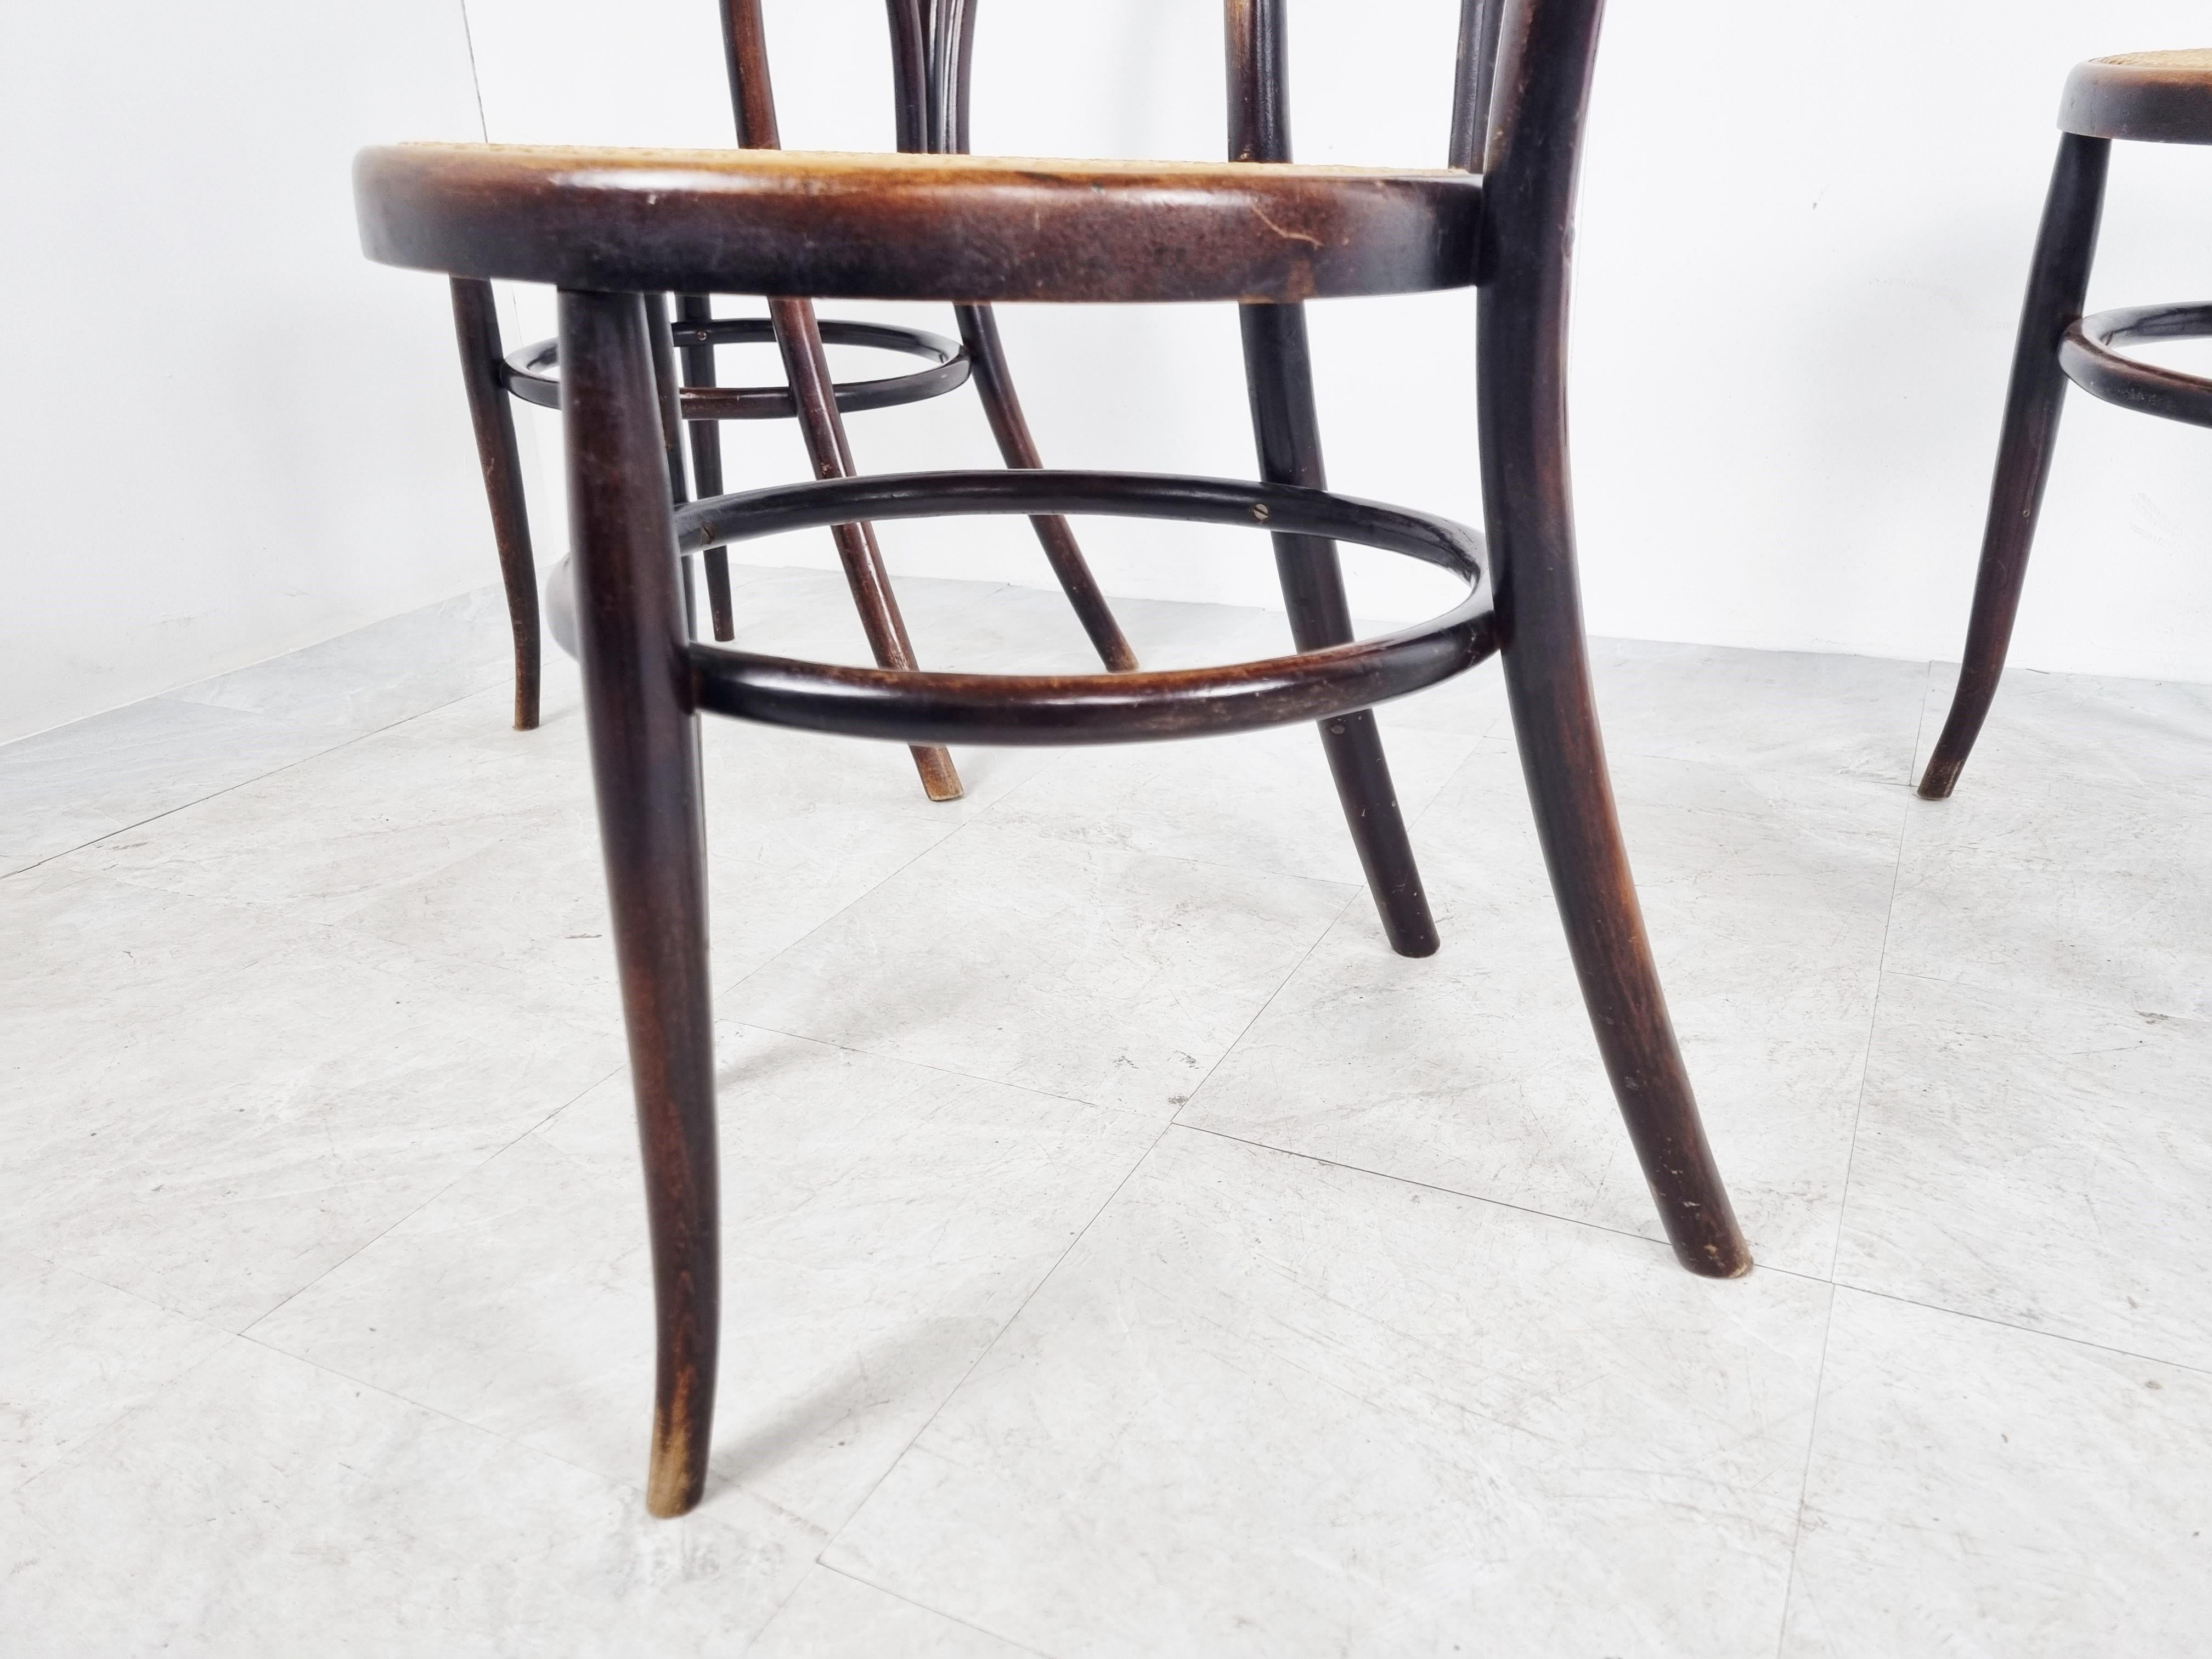 Set of 4 rare and very elegant bentwood dining chairs.

Not labelled but possibly Thonet.

Beautiful bentwood frames with caned seats.

Good condition

1920s - Austria (?)

Dimensions:

Width: 43 cm/16.9 inch
Depth: 52 cm/20.5